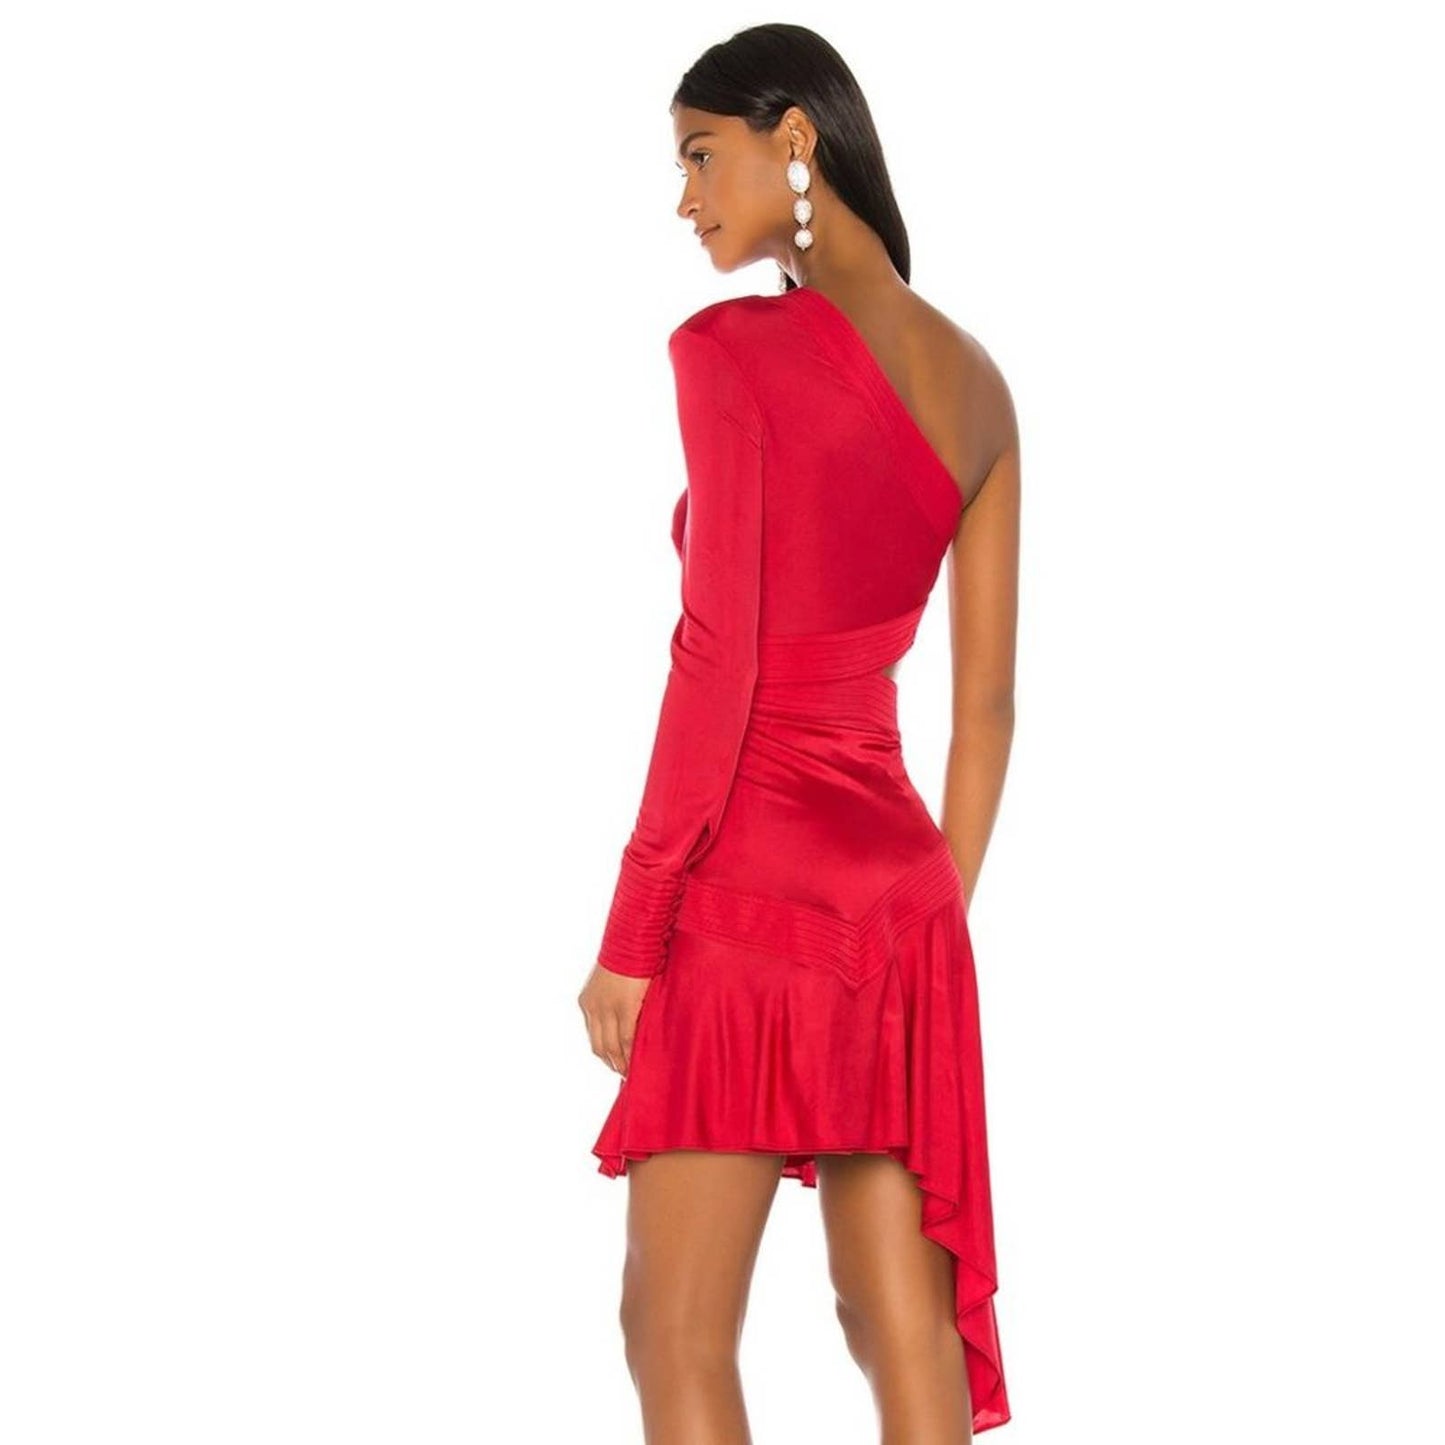 Alexis Rocca Dress in Cherry Red Size Small